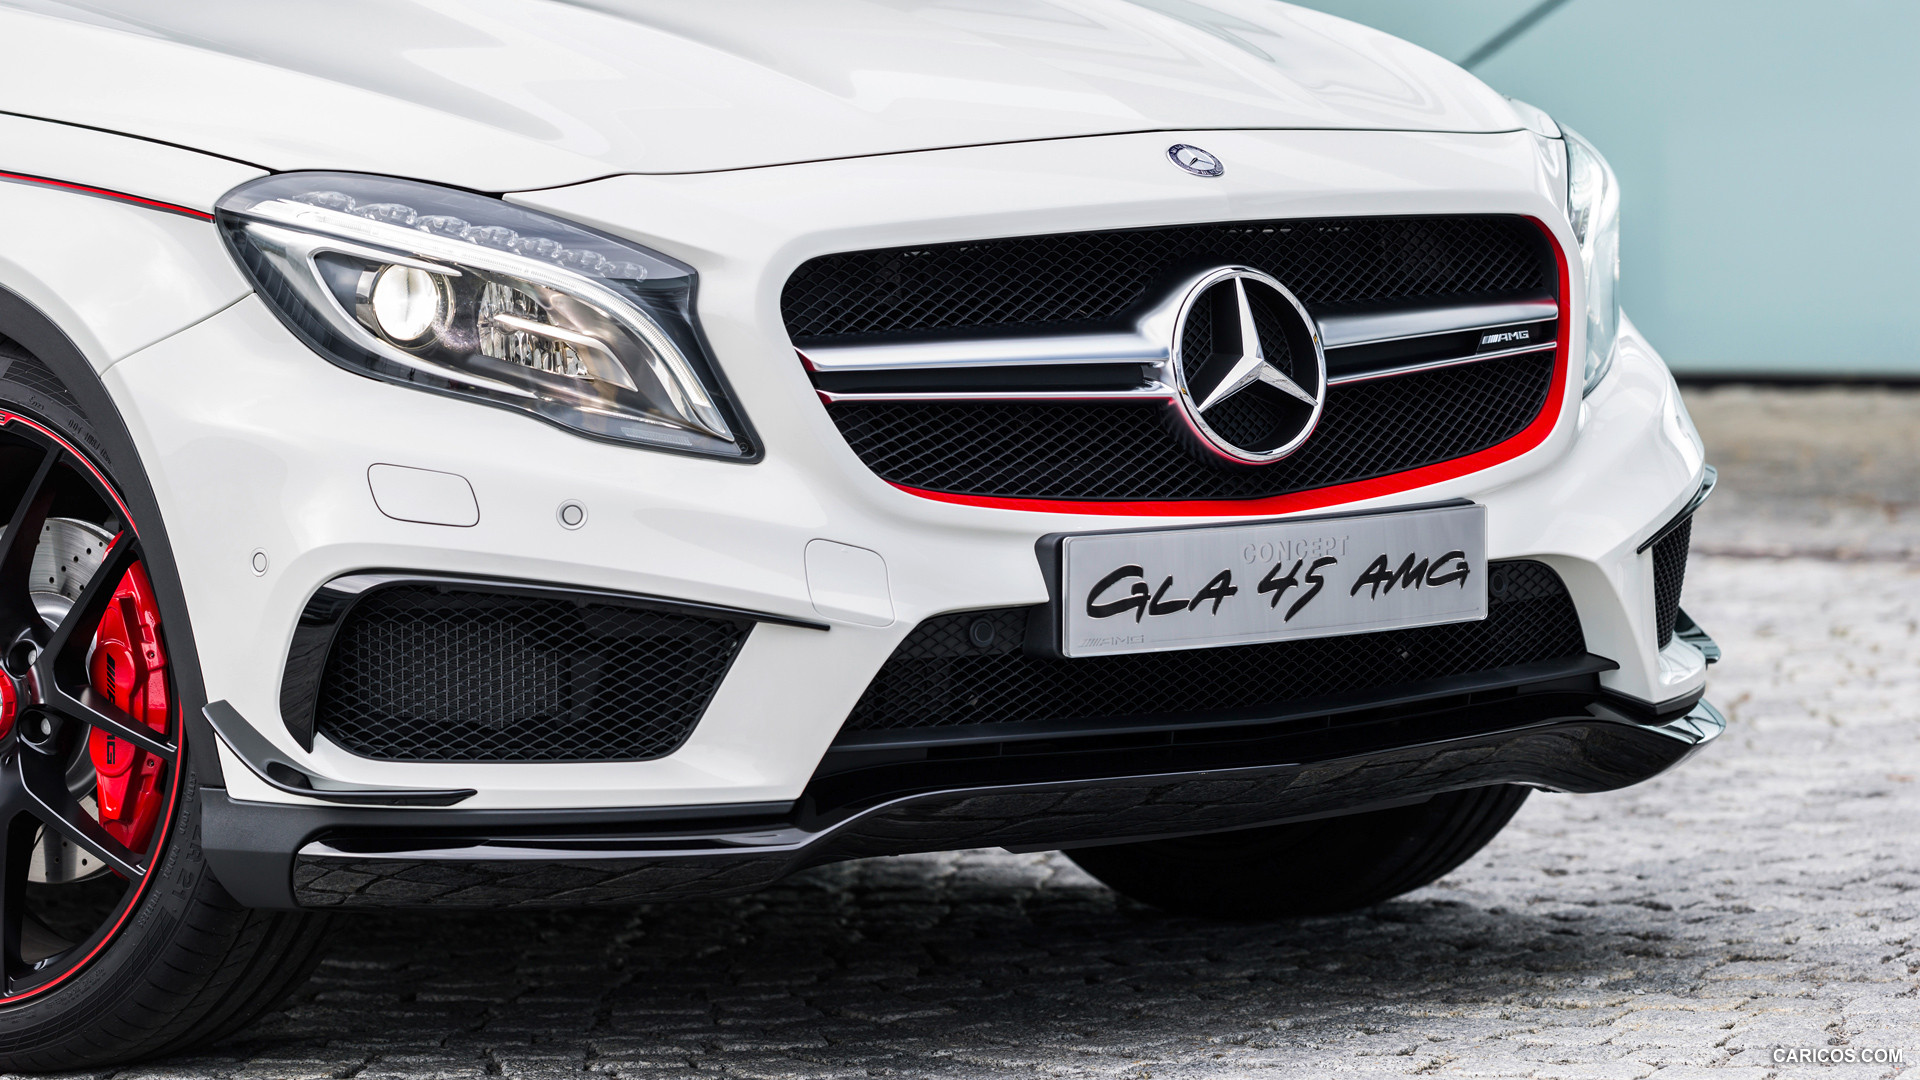 Mercedes-Benz GLA 45 AMG Concept (2013)  - Front, #5 of 15